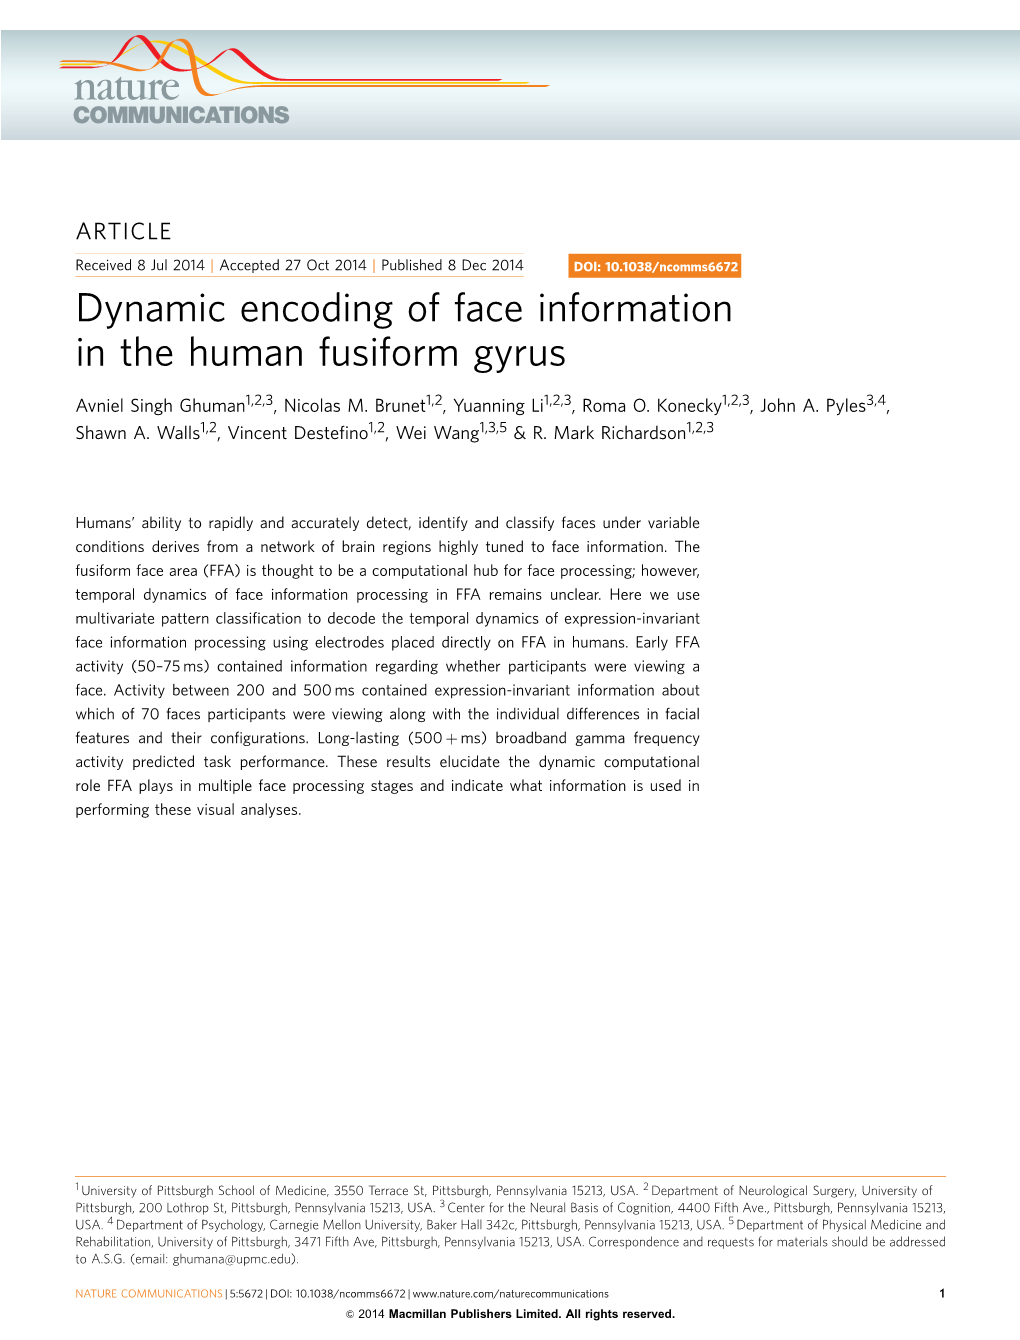 Dynamic Encoding of Face Information in the Human Fusiform Gyrus